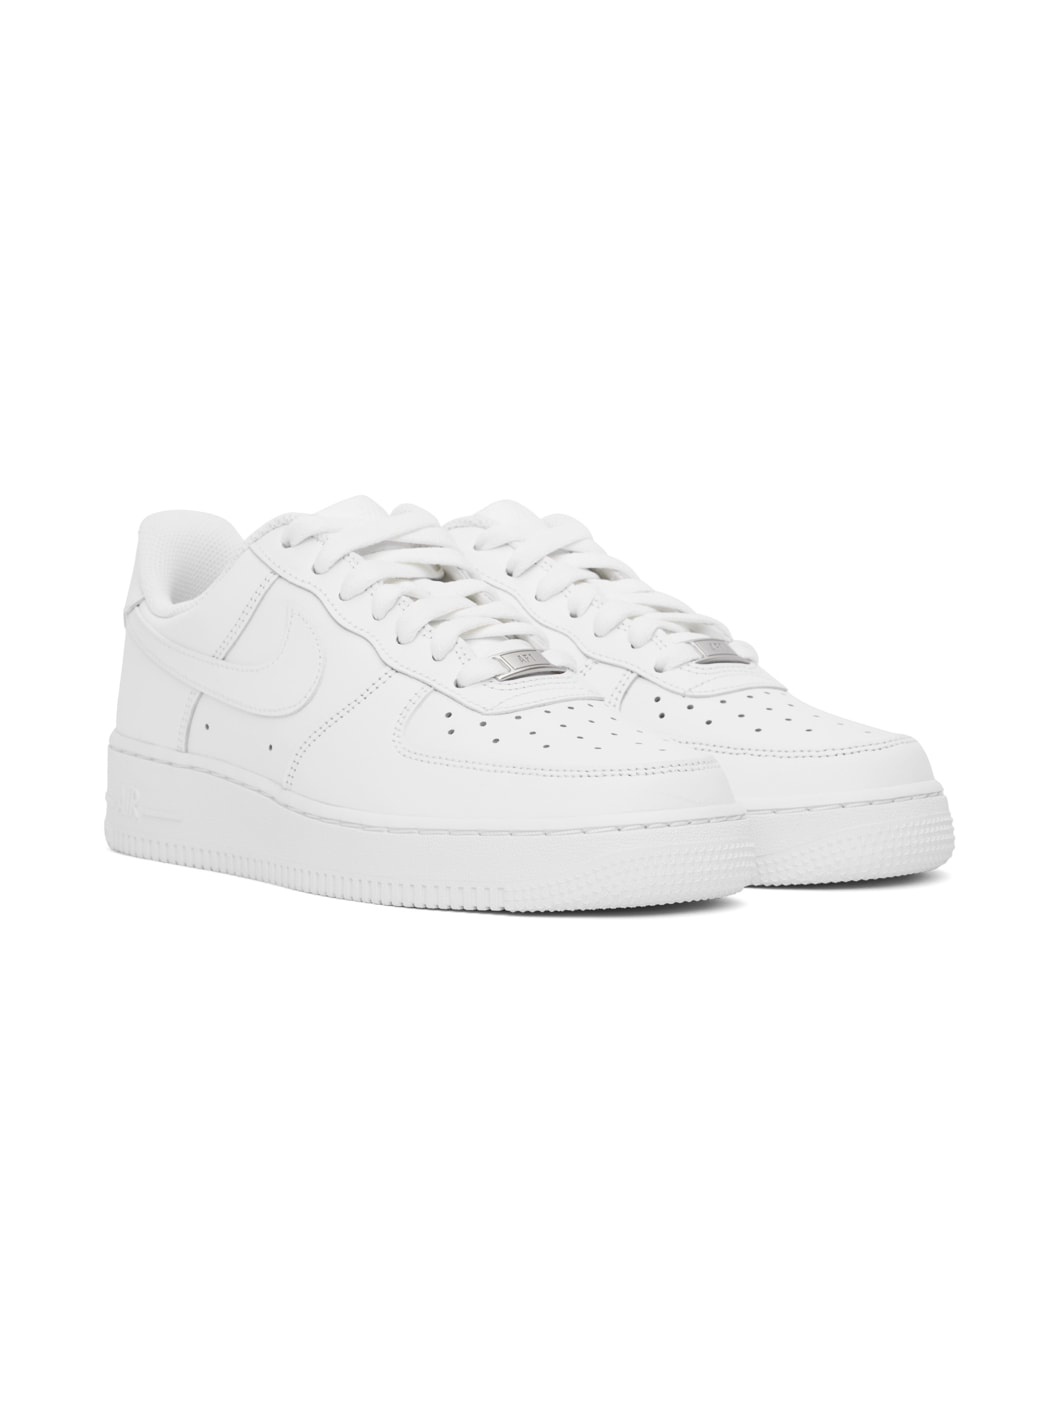 White Air Force 1 '07 Sneakers - 4